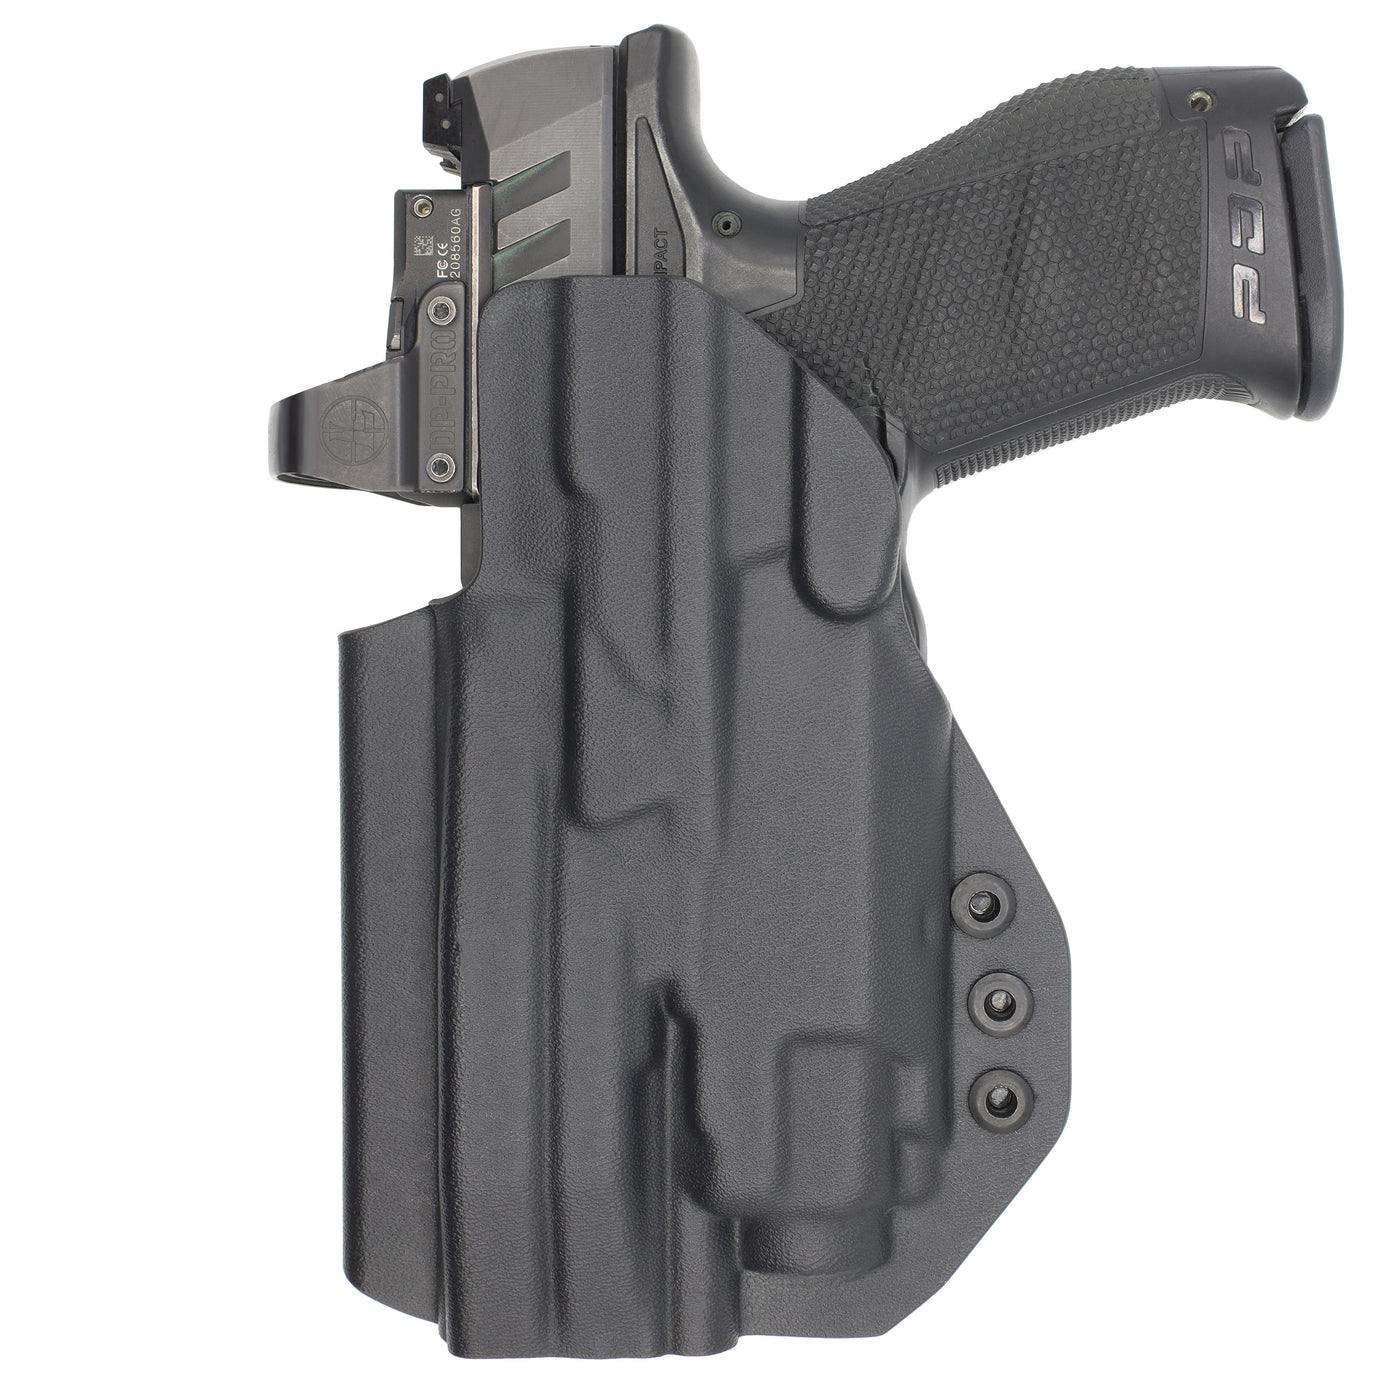 C&G Holsters quickship IWB Tactical H&K P30/sk streamlight TLR8 holstered back view